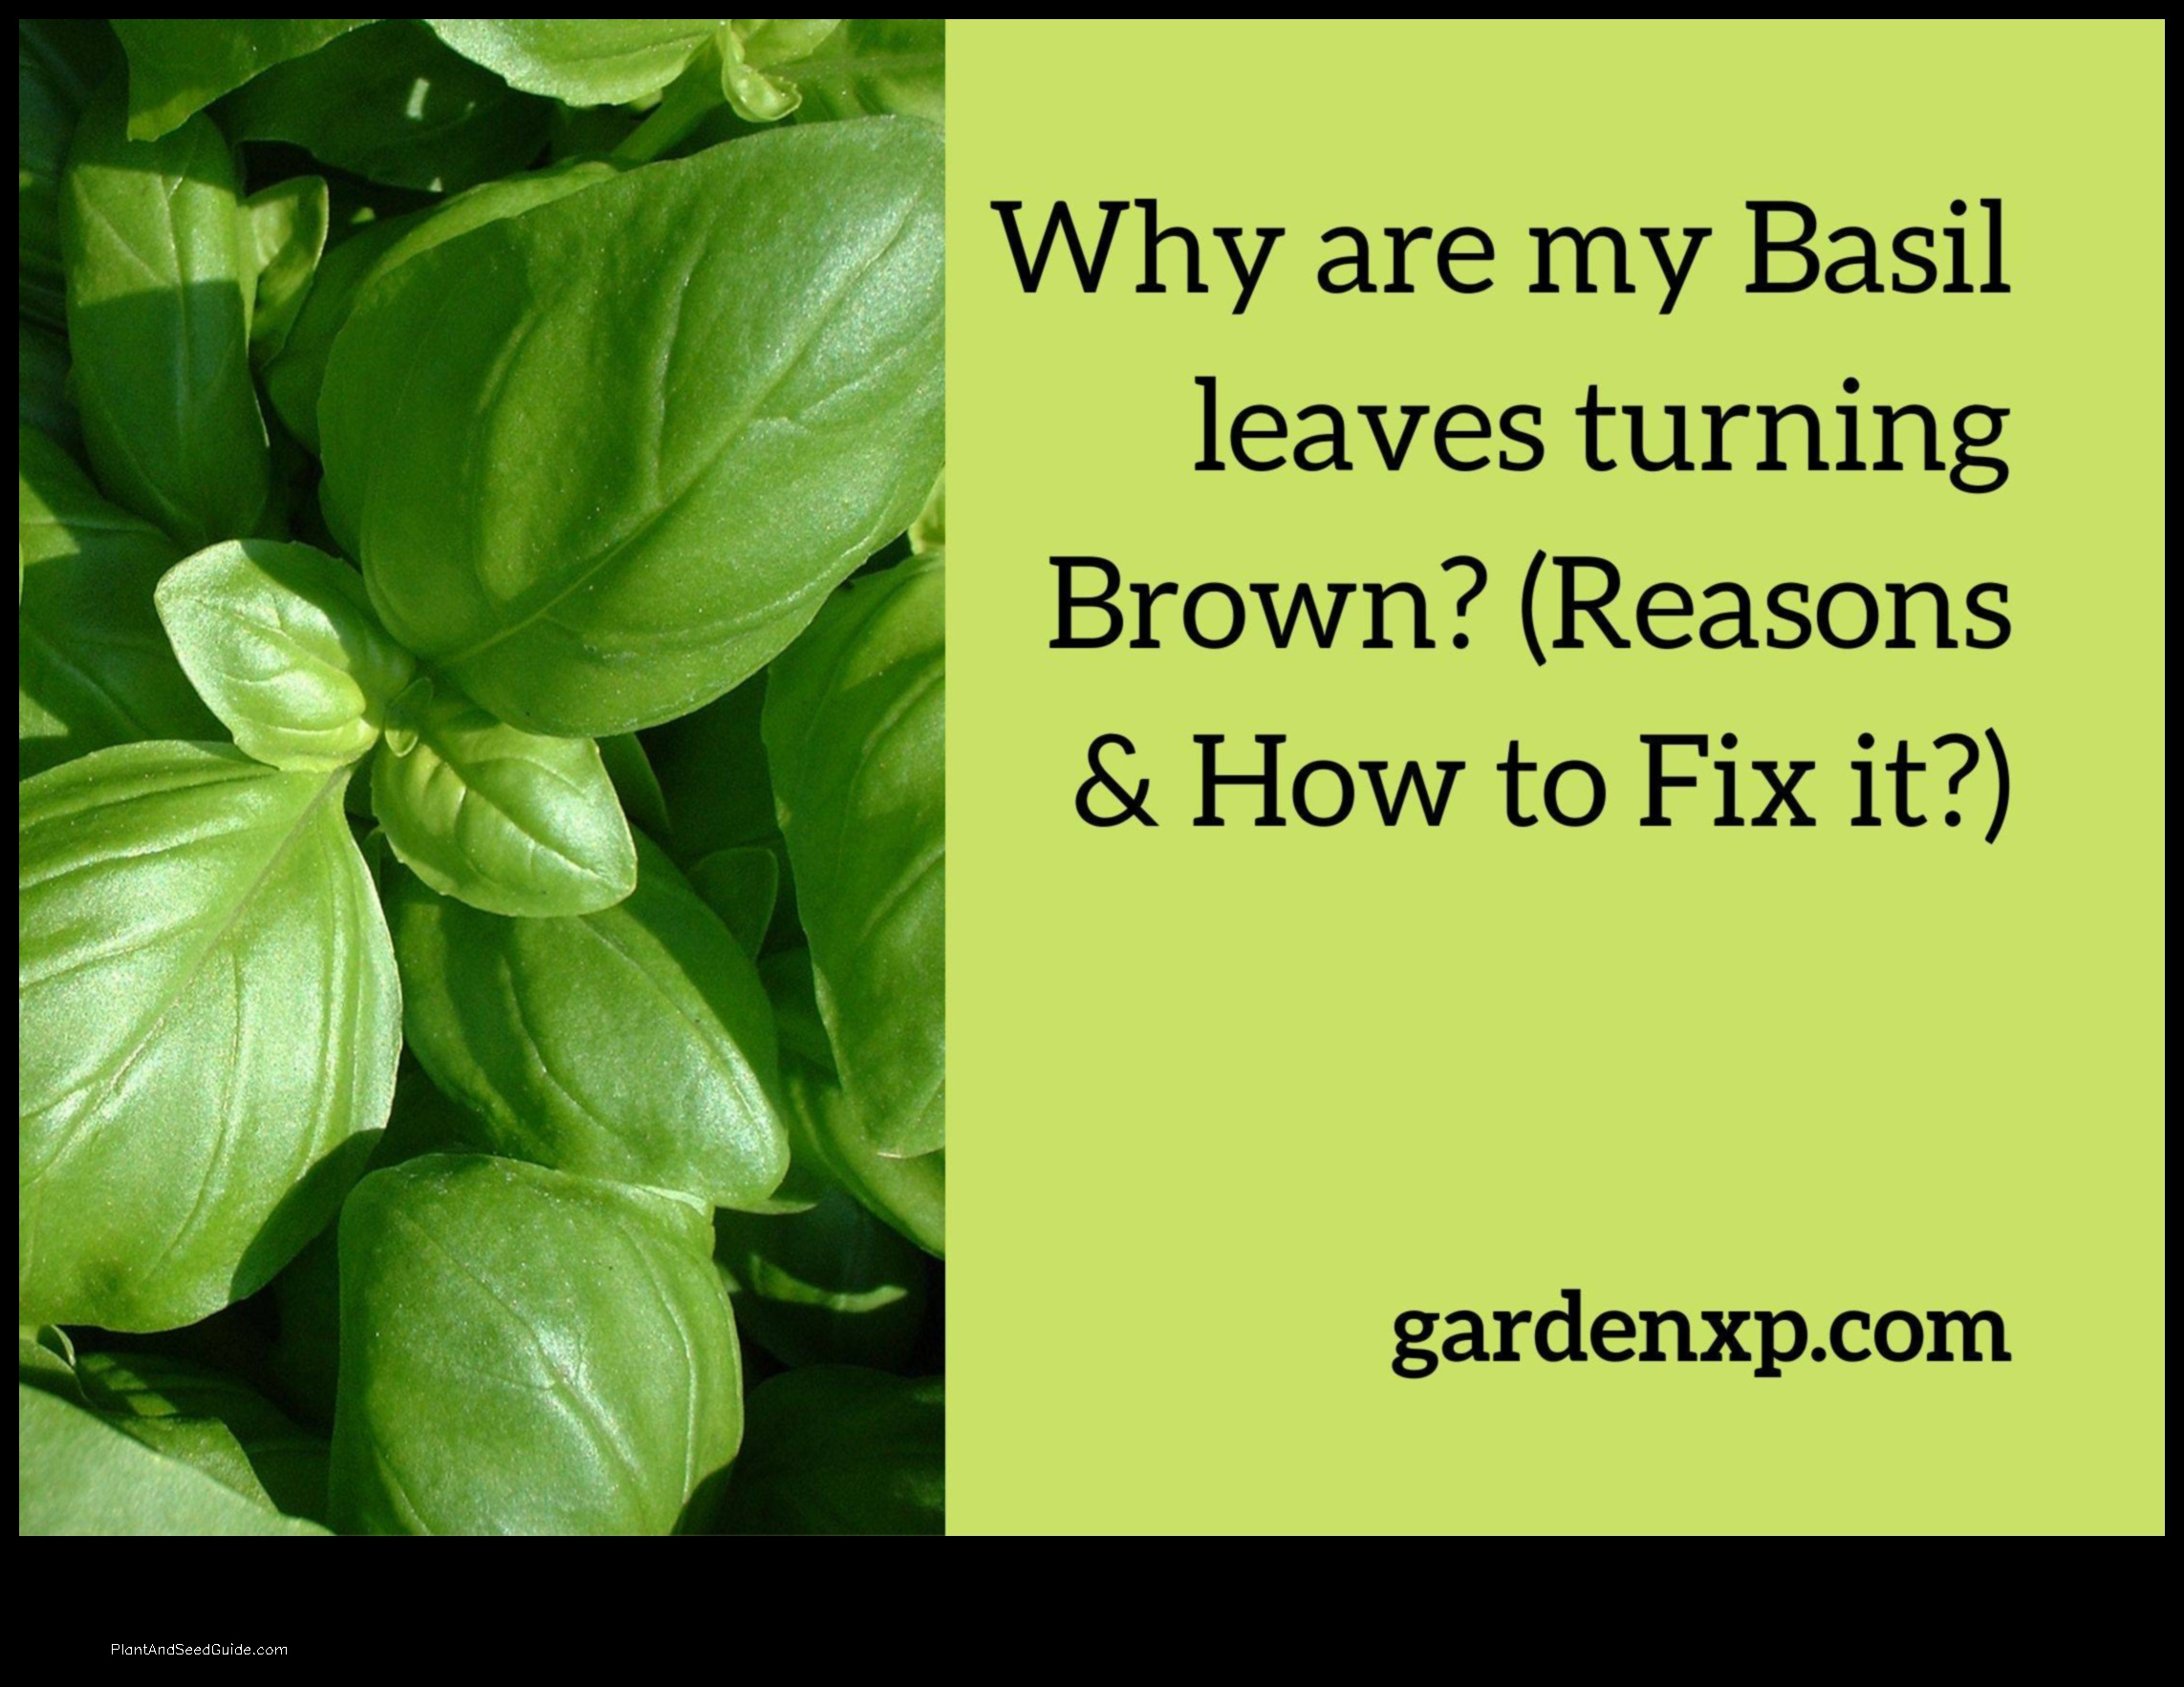 why is my basil plant turning brown